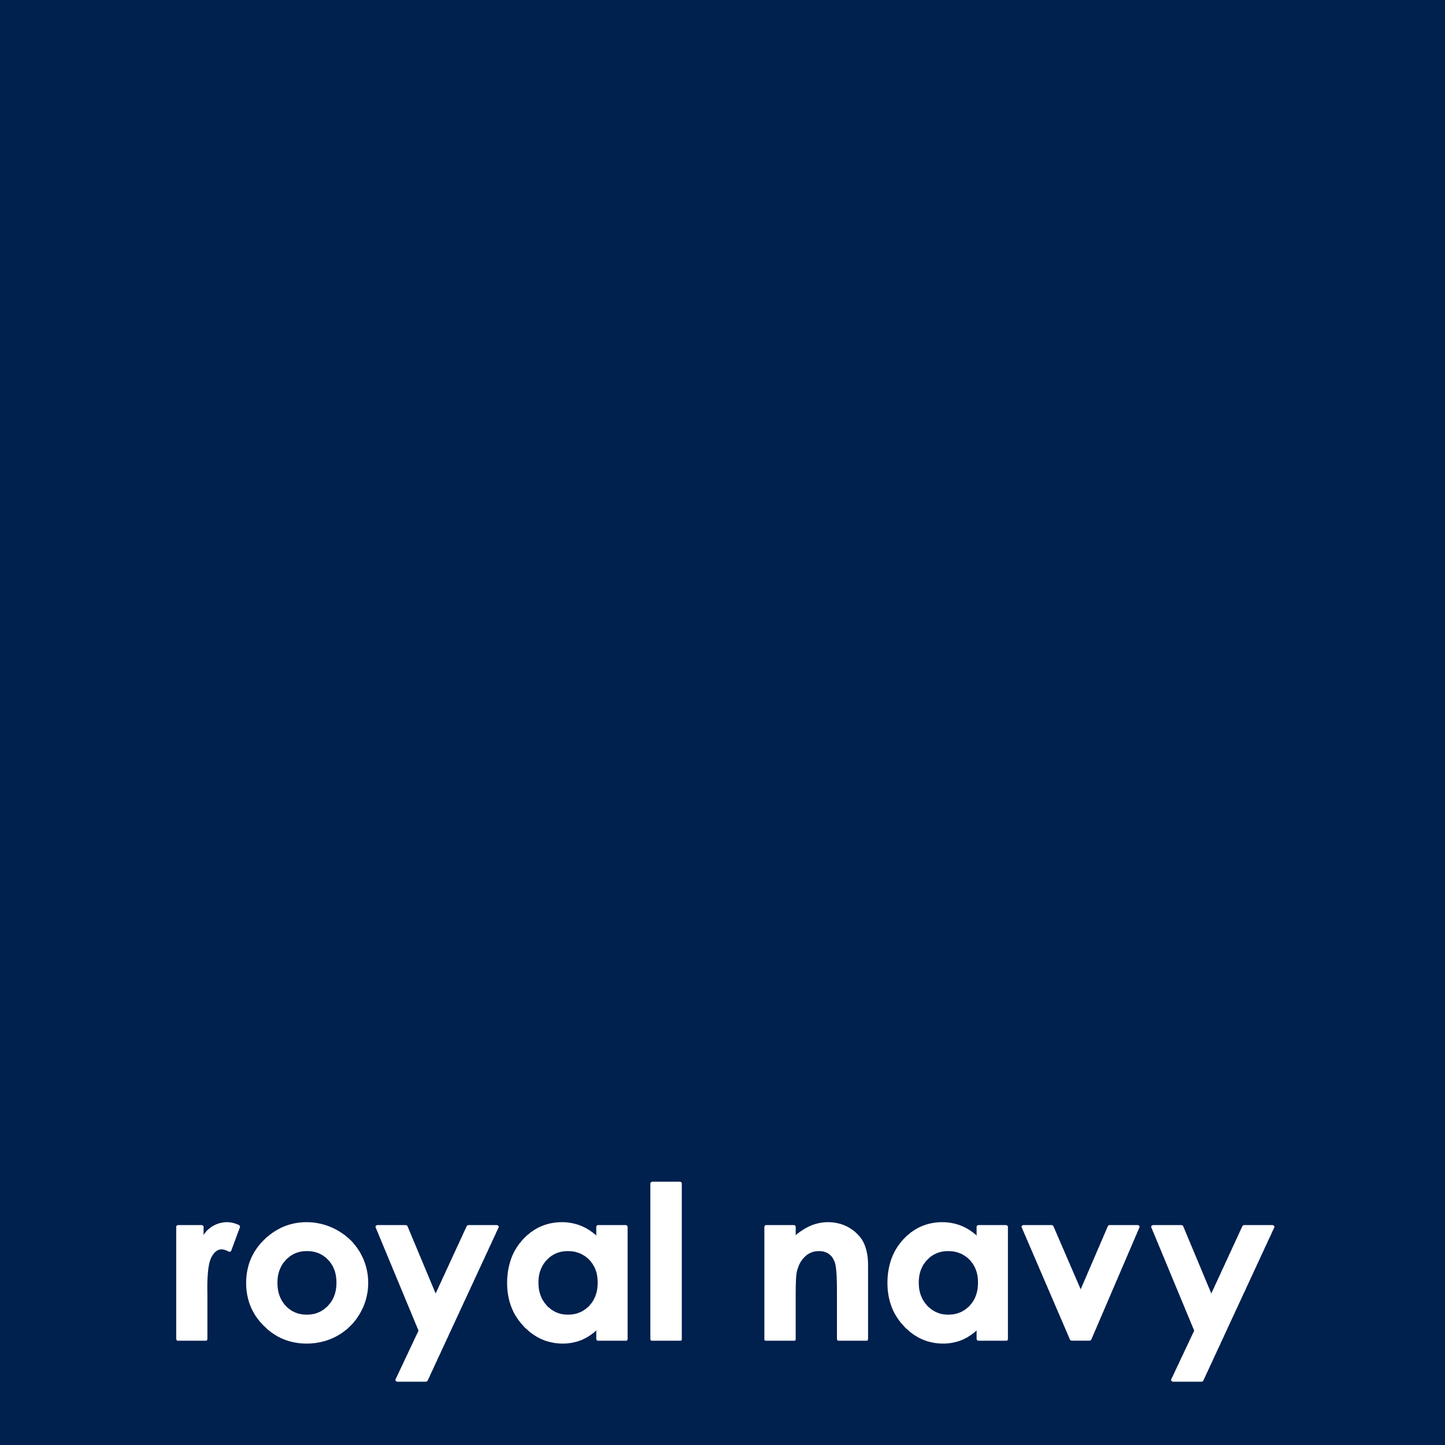 Navy background with white text that reads "royal navy".